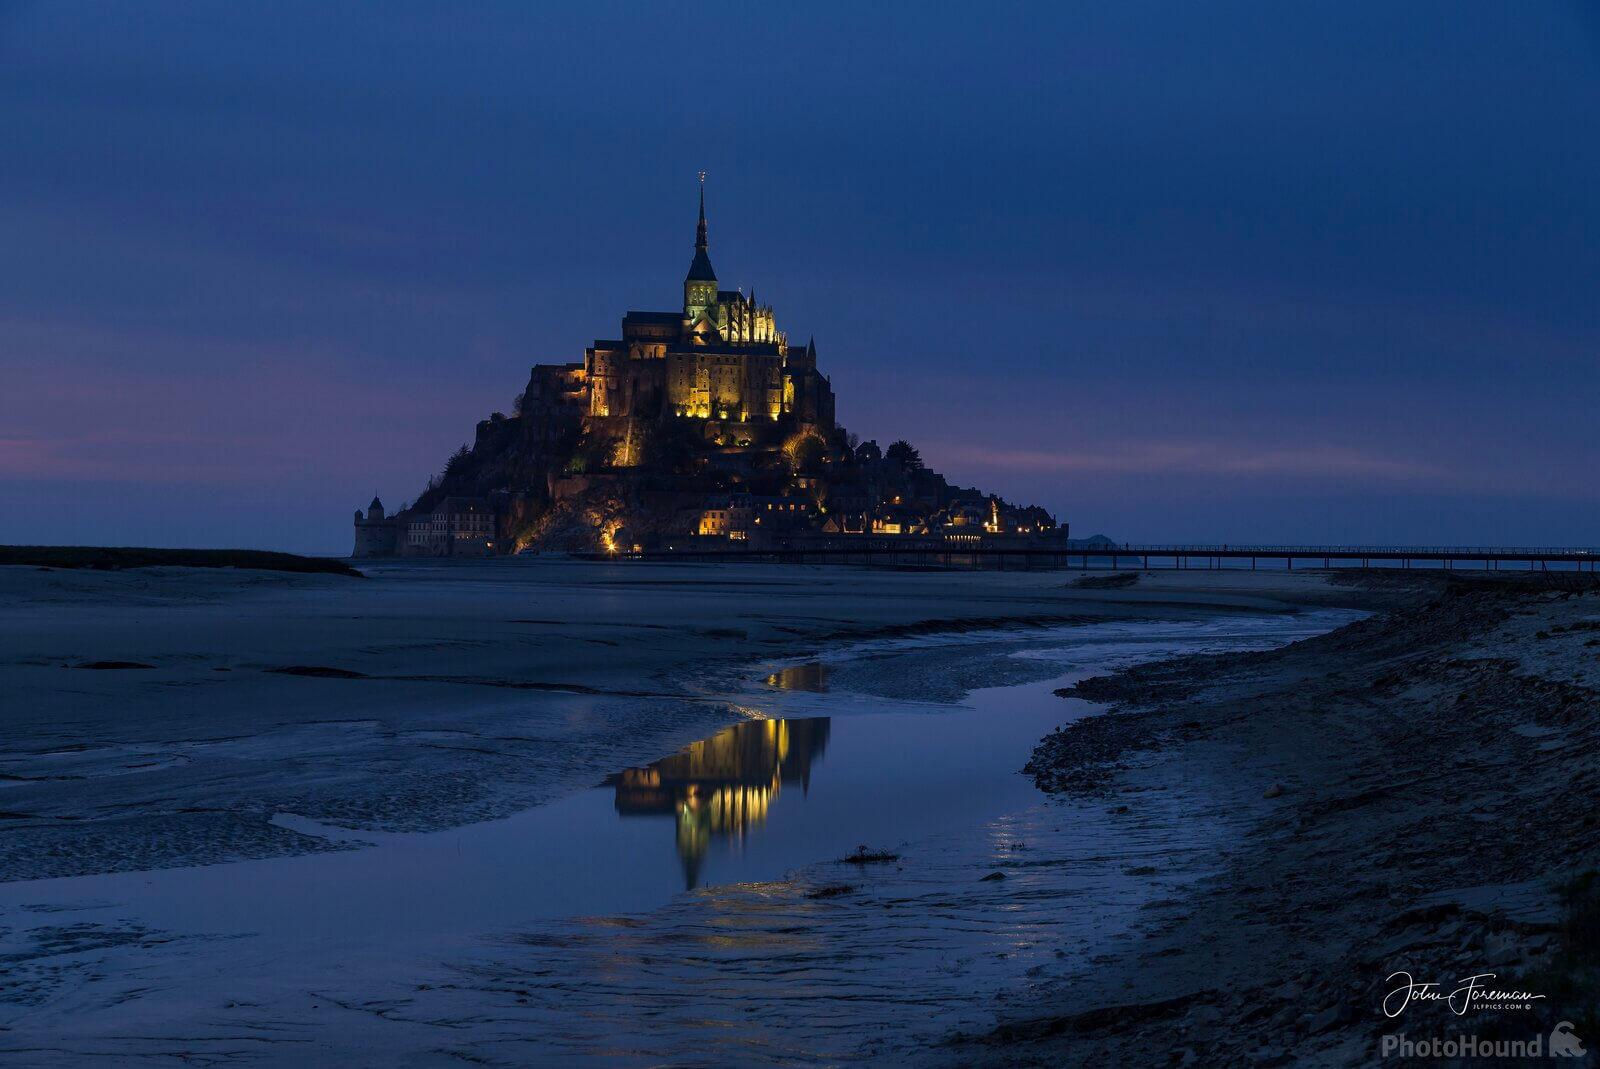 Image of Mont Saint-Michel from the Barrage by John Foreman